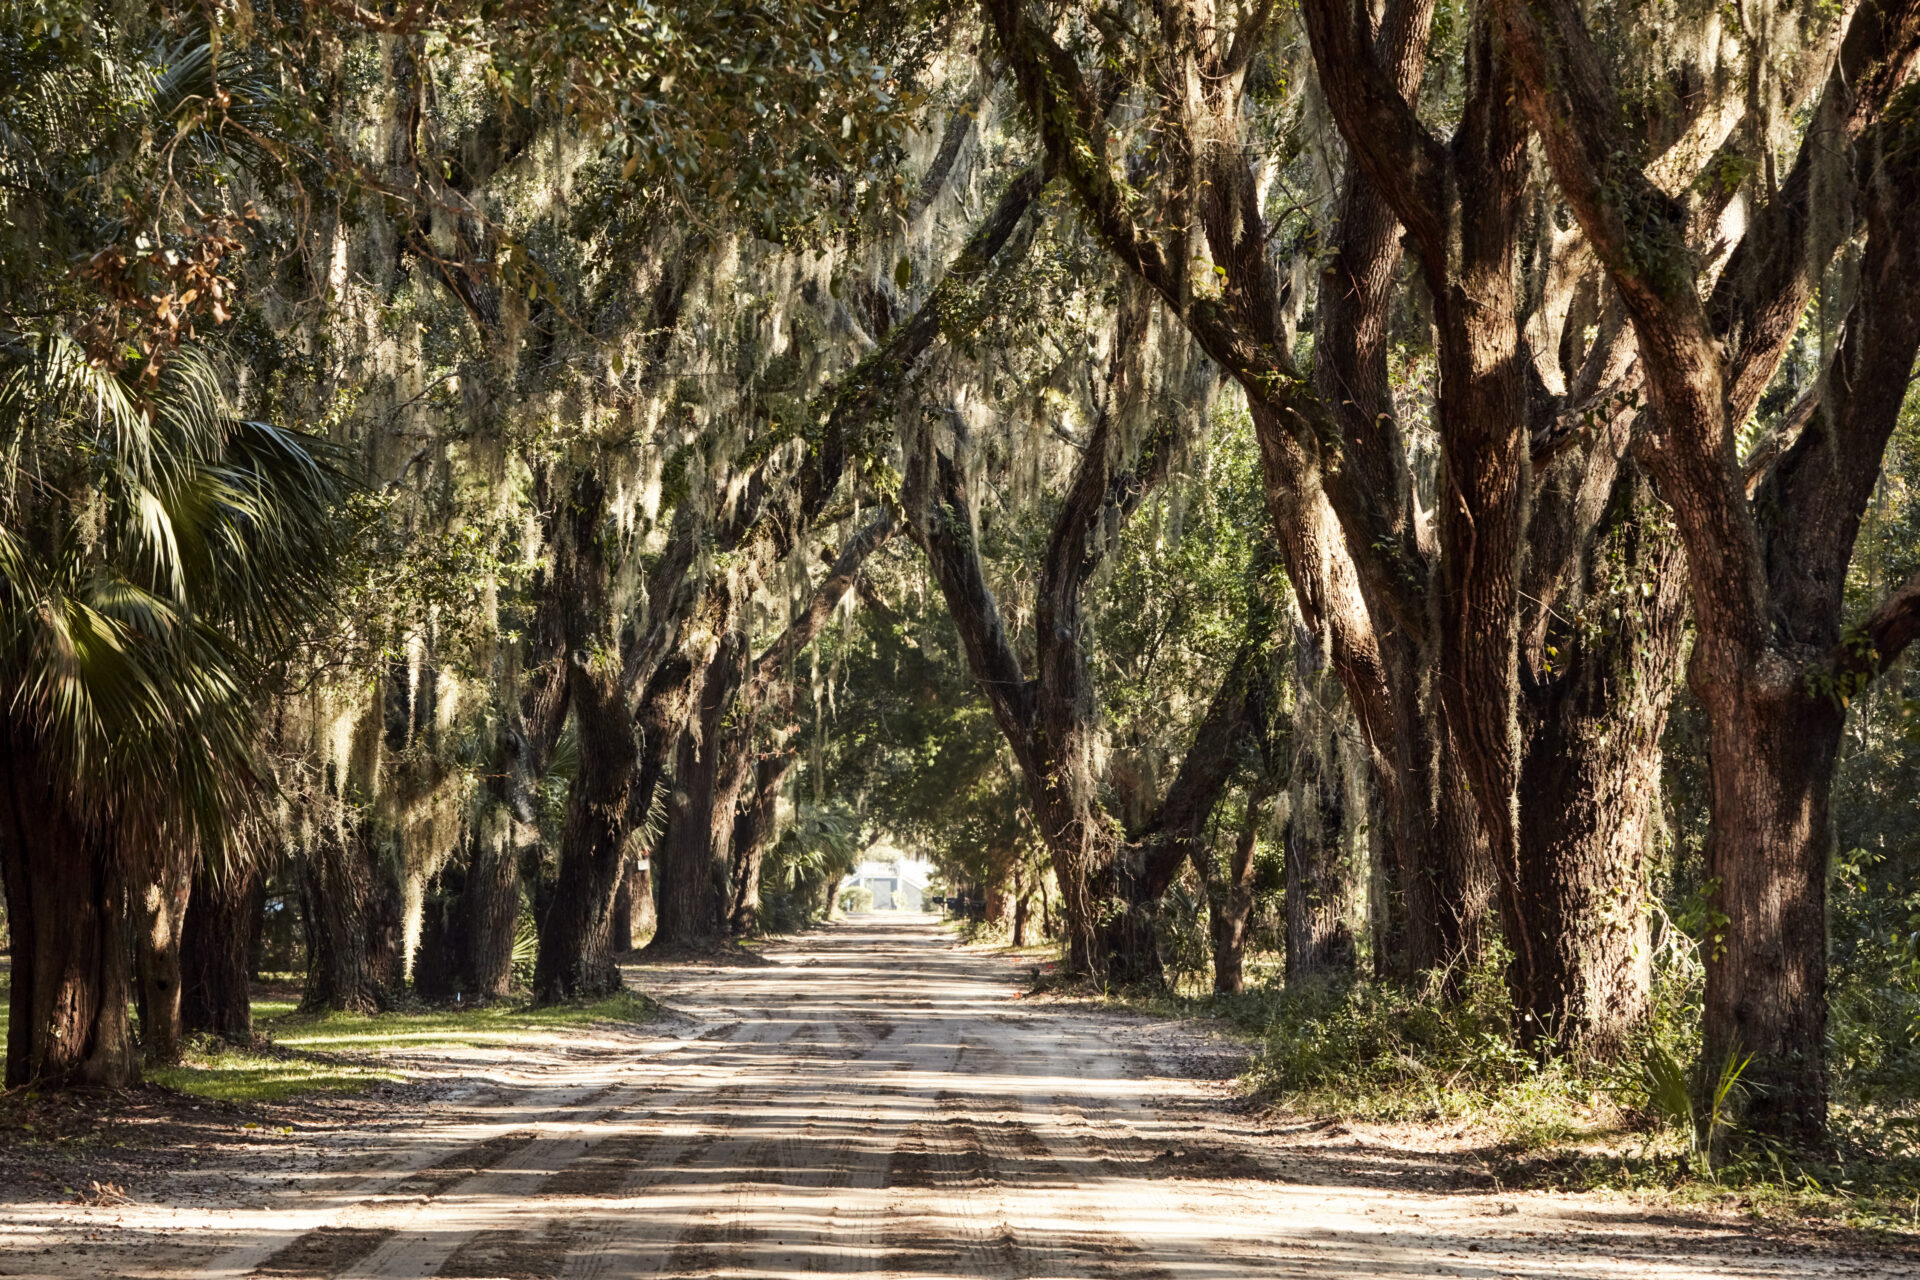 Coffin Road with mossy trees in the South Carolina Lowcountry